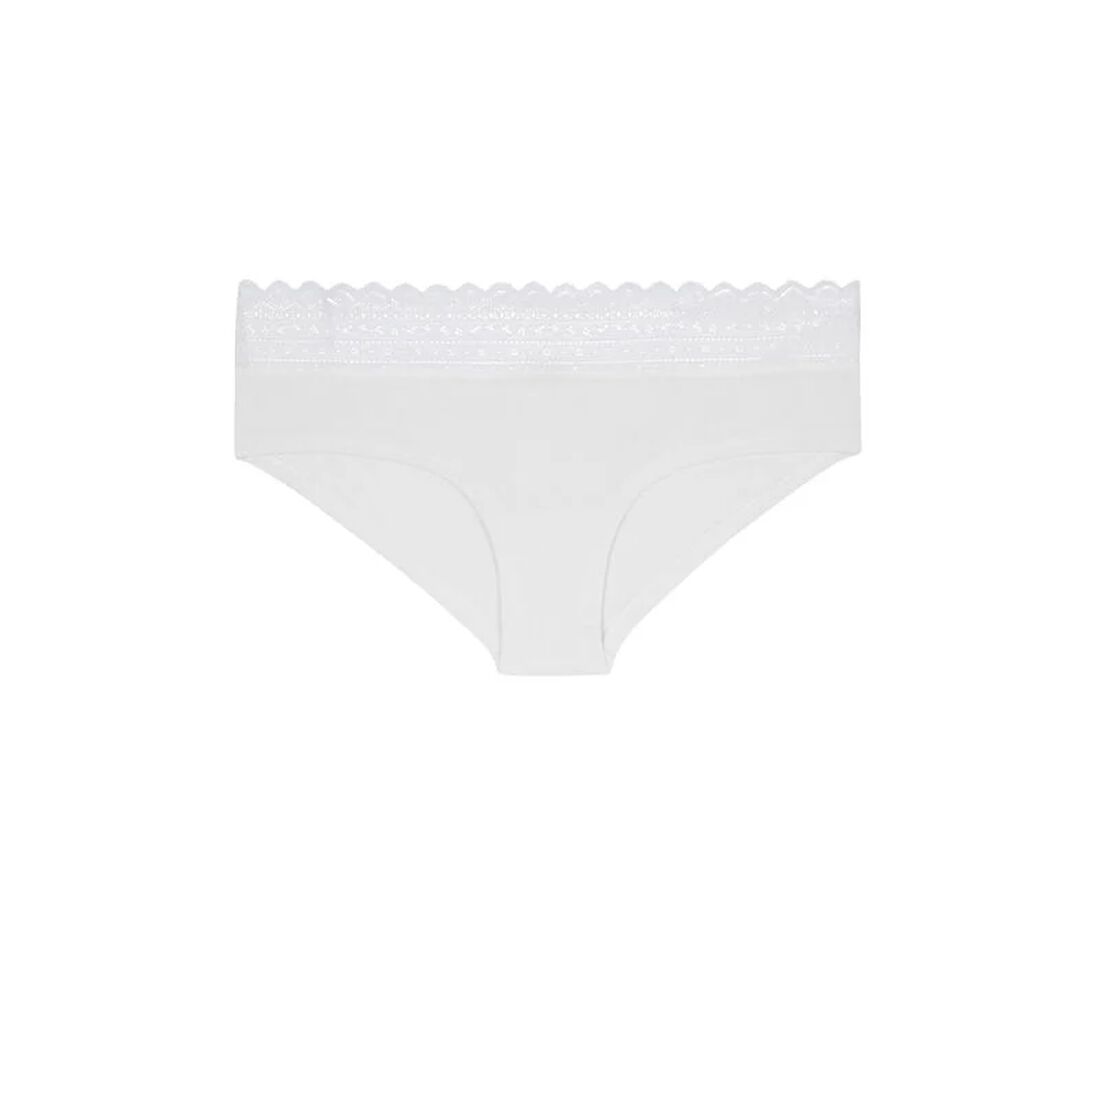 cotton shorty with lace;